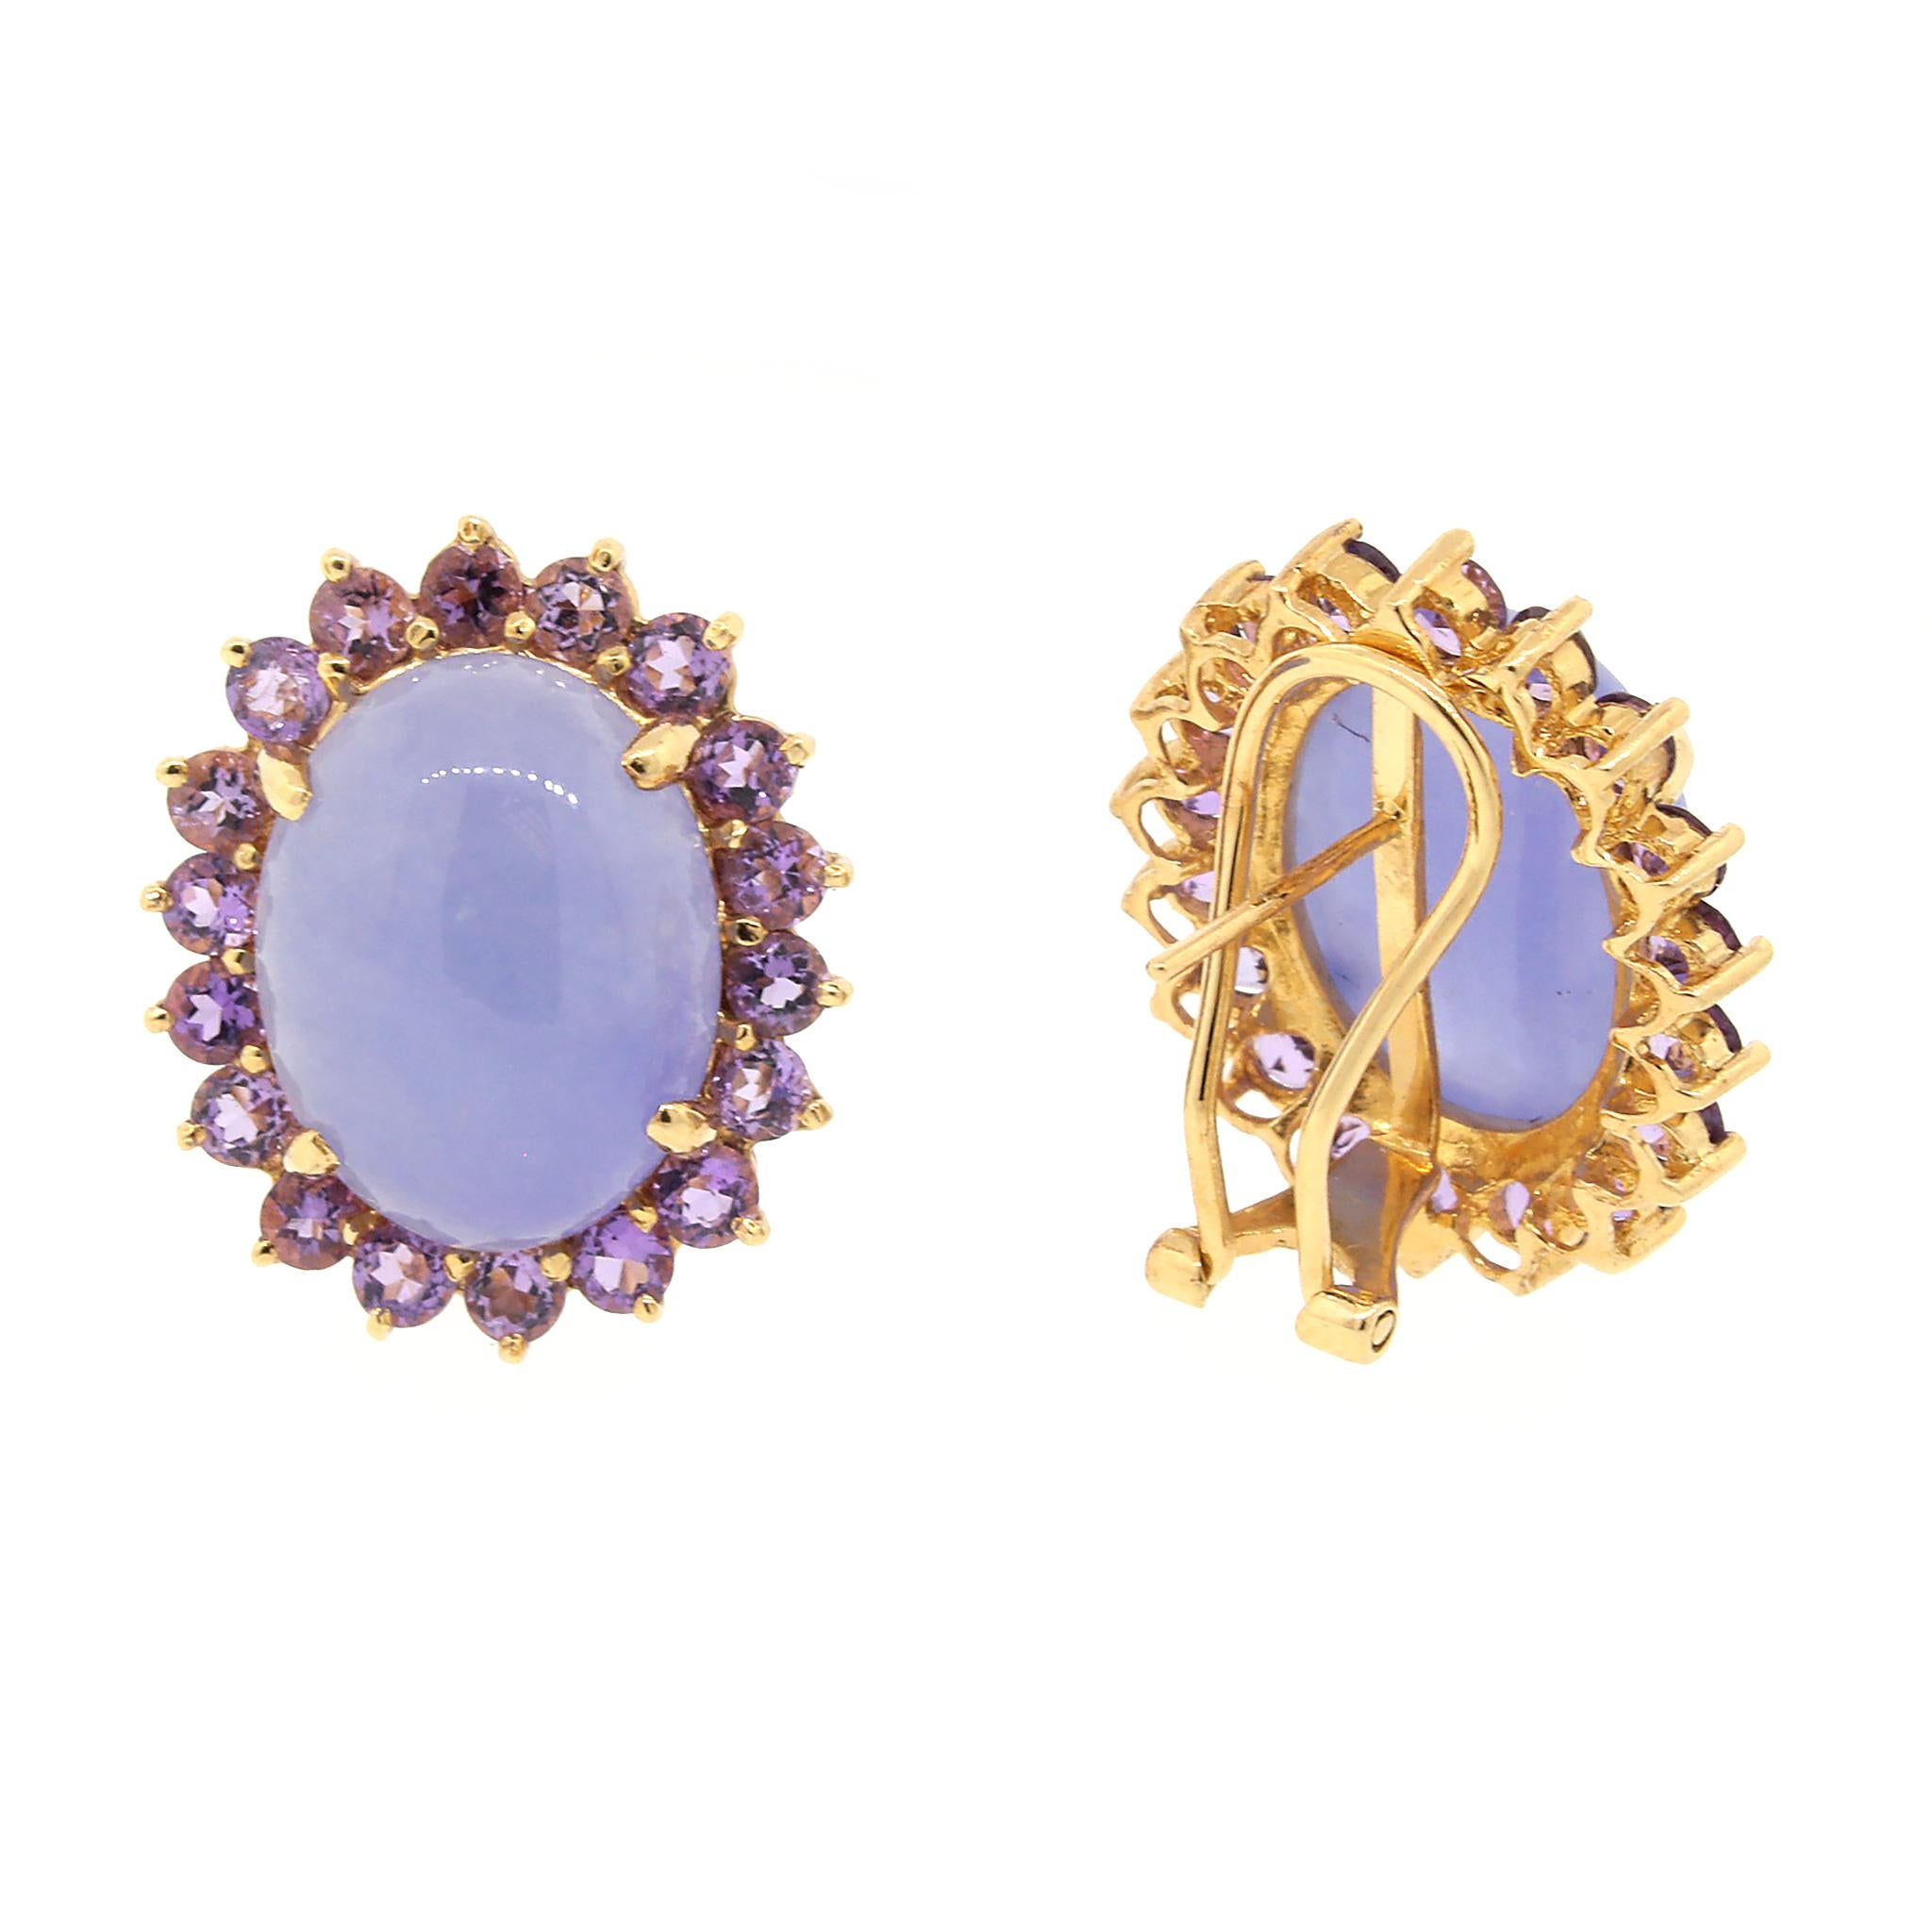 14k Yellow Gold
Amethyst Cabochon
Measurement: 20mm x 16mm
Total Weight: 11.4 grams